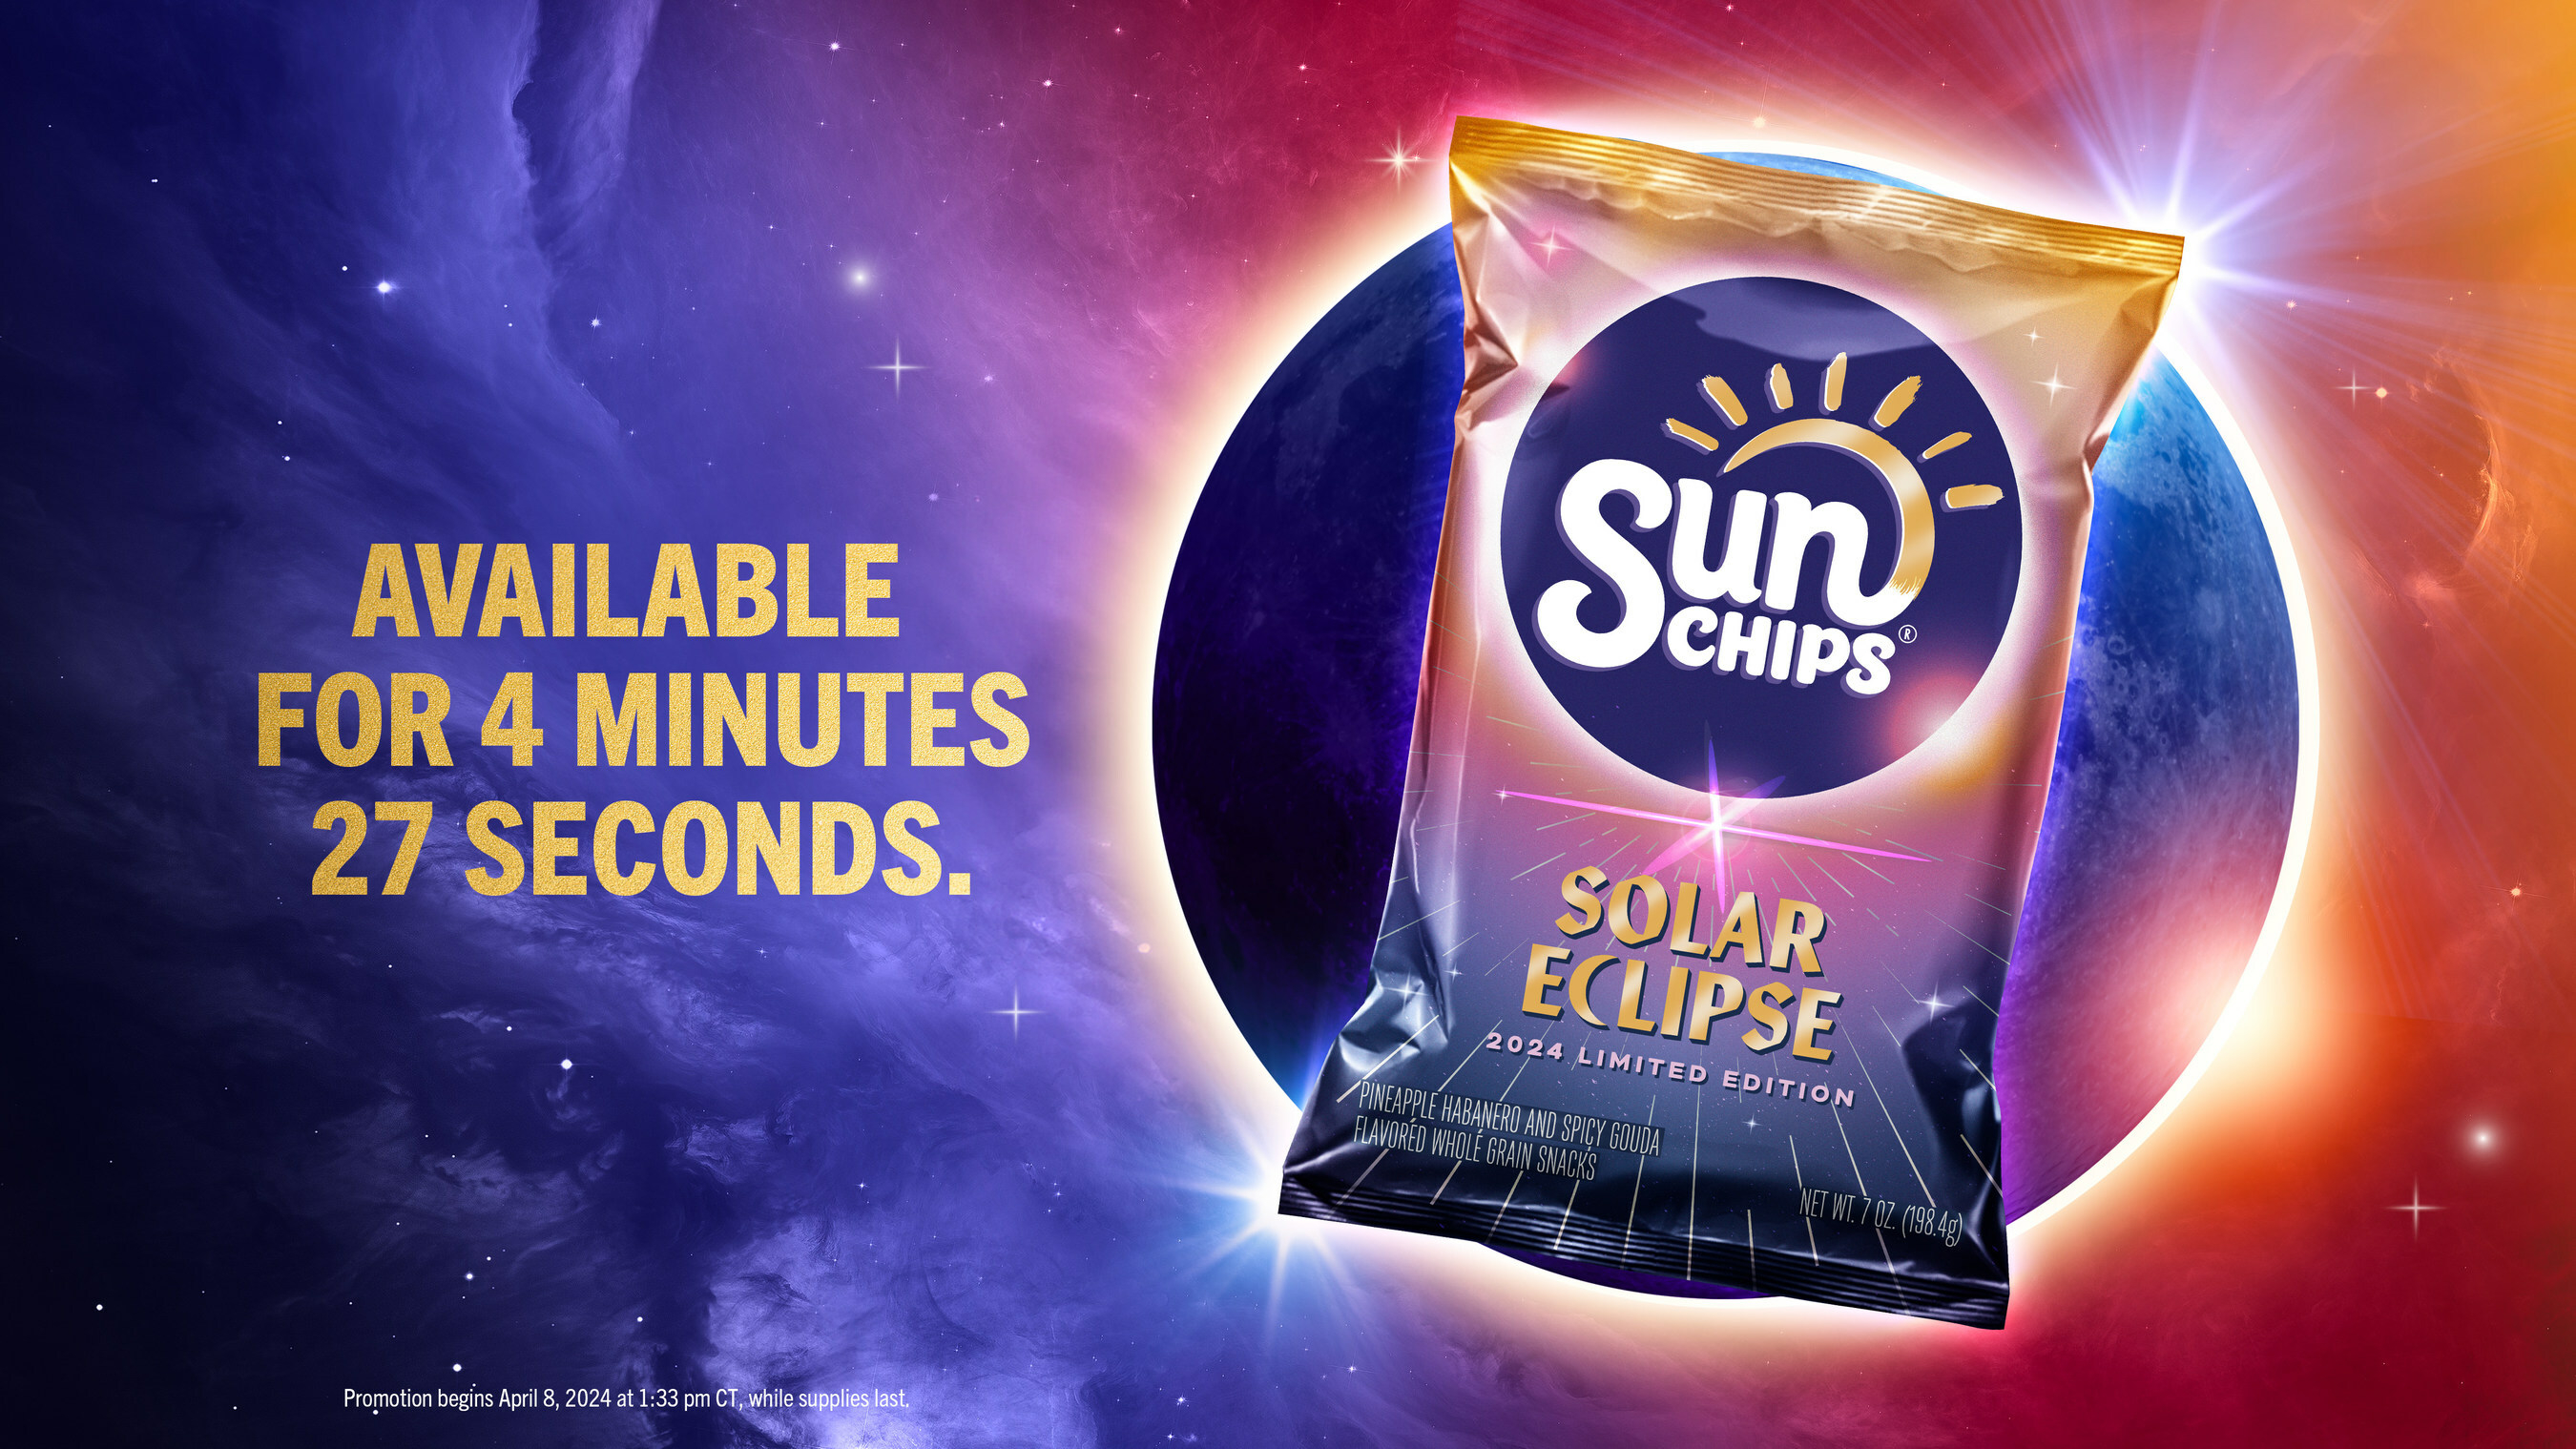 spacey gases of purple pink red and orange collide in the background. A similarly colored bag of SunChips stands in front on the right. behind it is a darkened moon eclipsing the sun.